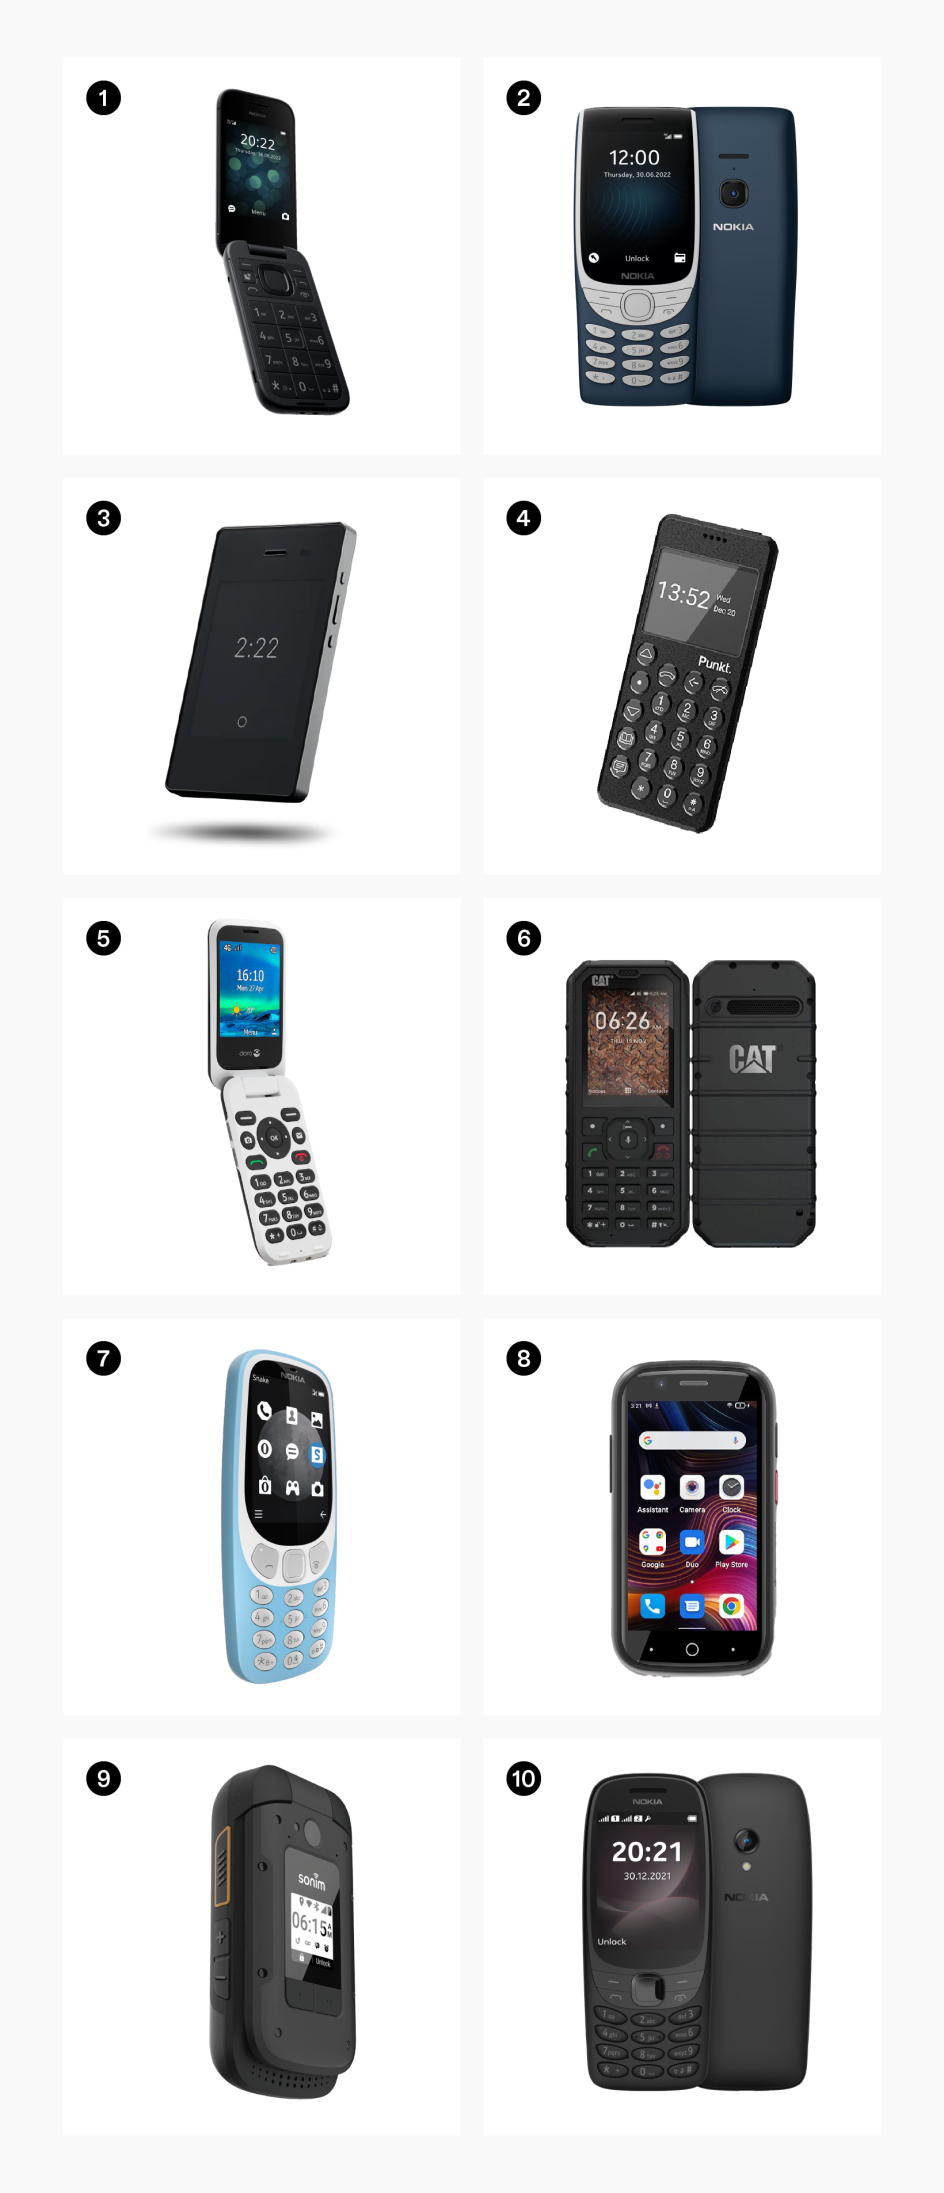 5 ways Nokia helped create the modern cell phone